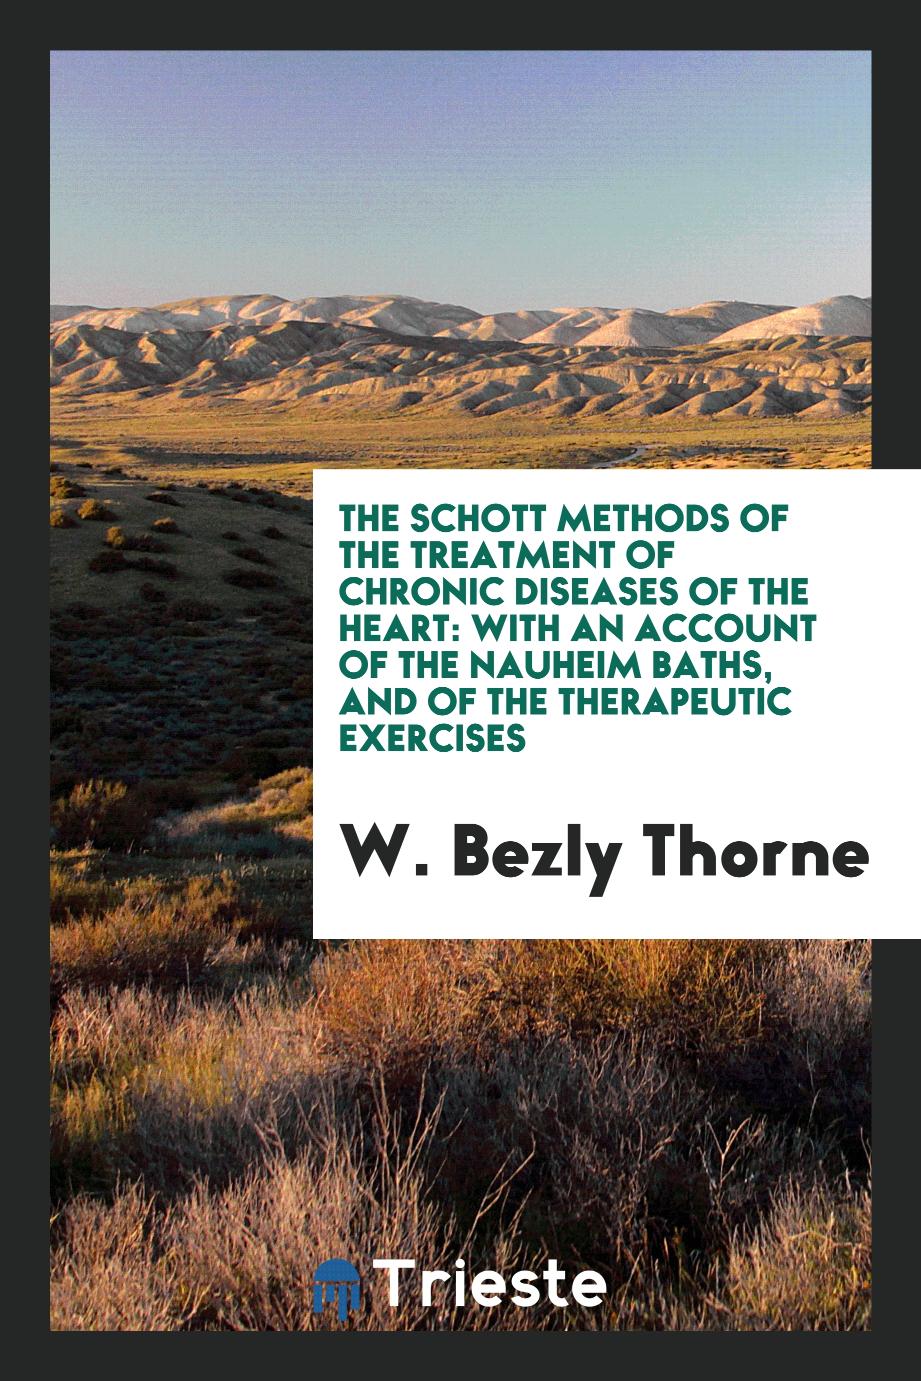 The Schott Methods of the Treatment of Chronic Diseases of the Heart: With an Account of the Nauheim Baths, and of the Therapeutic Exercises